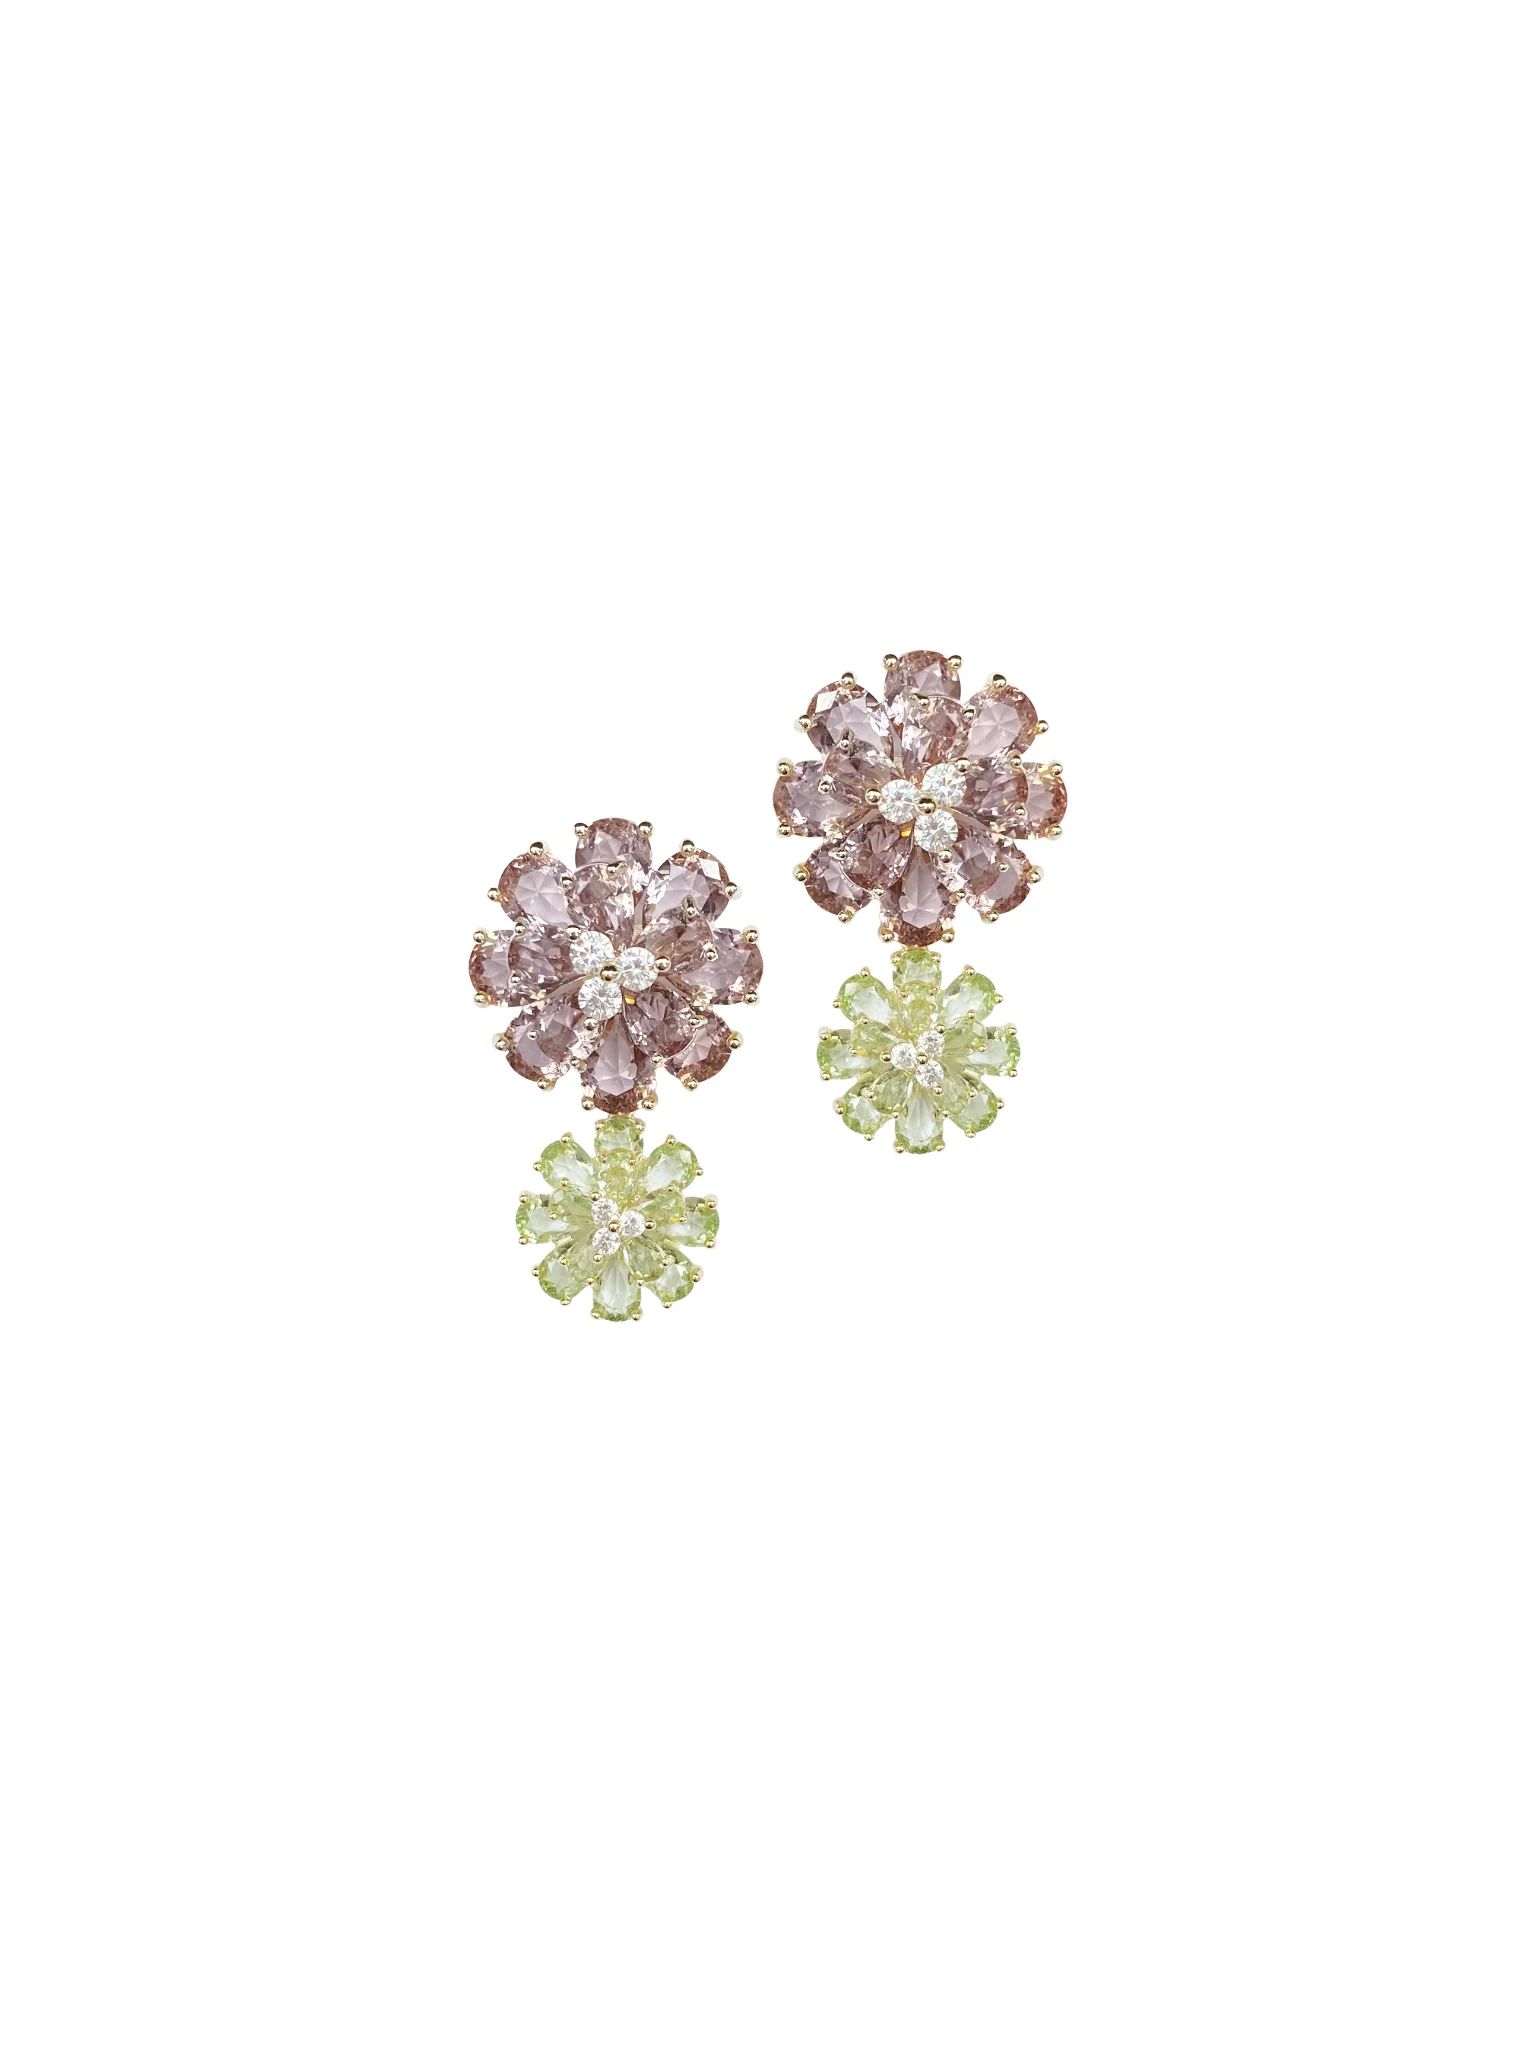 Lavender and Thyme Bougainvillea Flower Drops | Nicola Bathie Jewelry